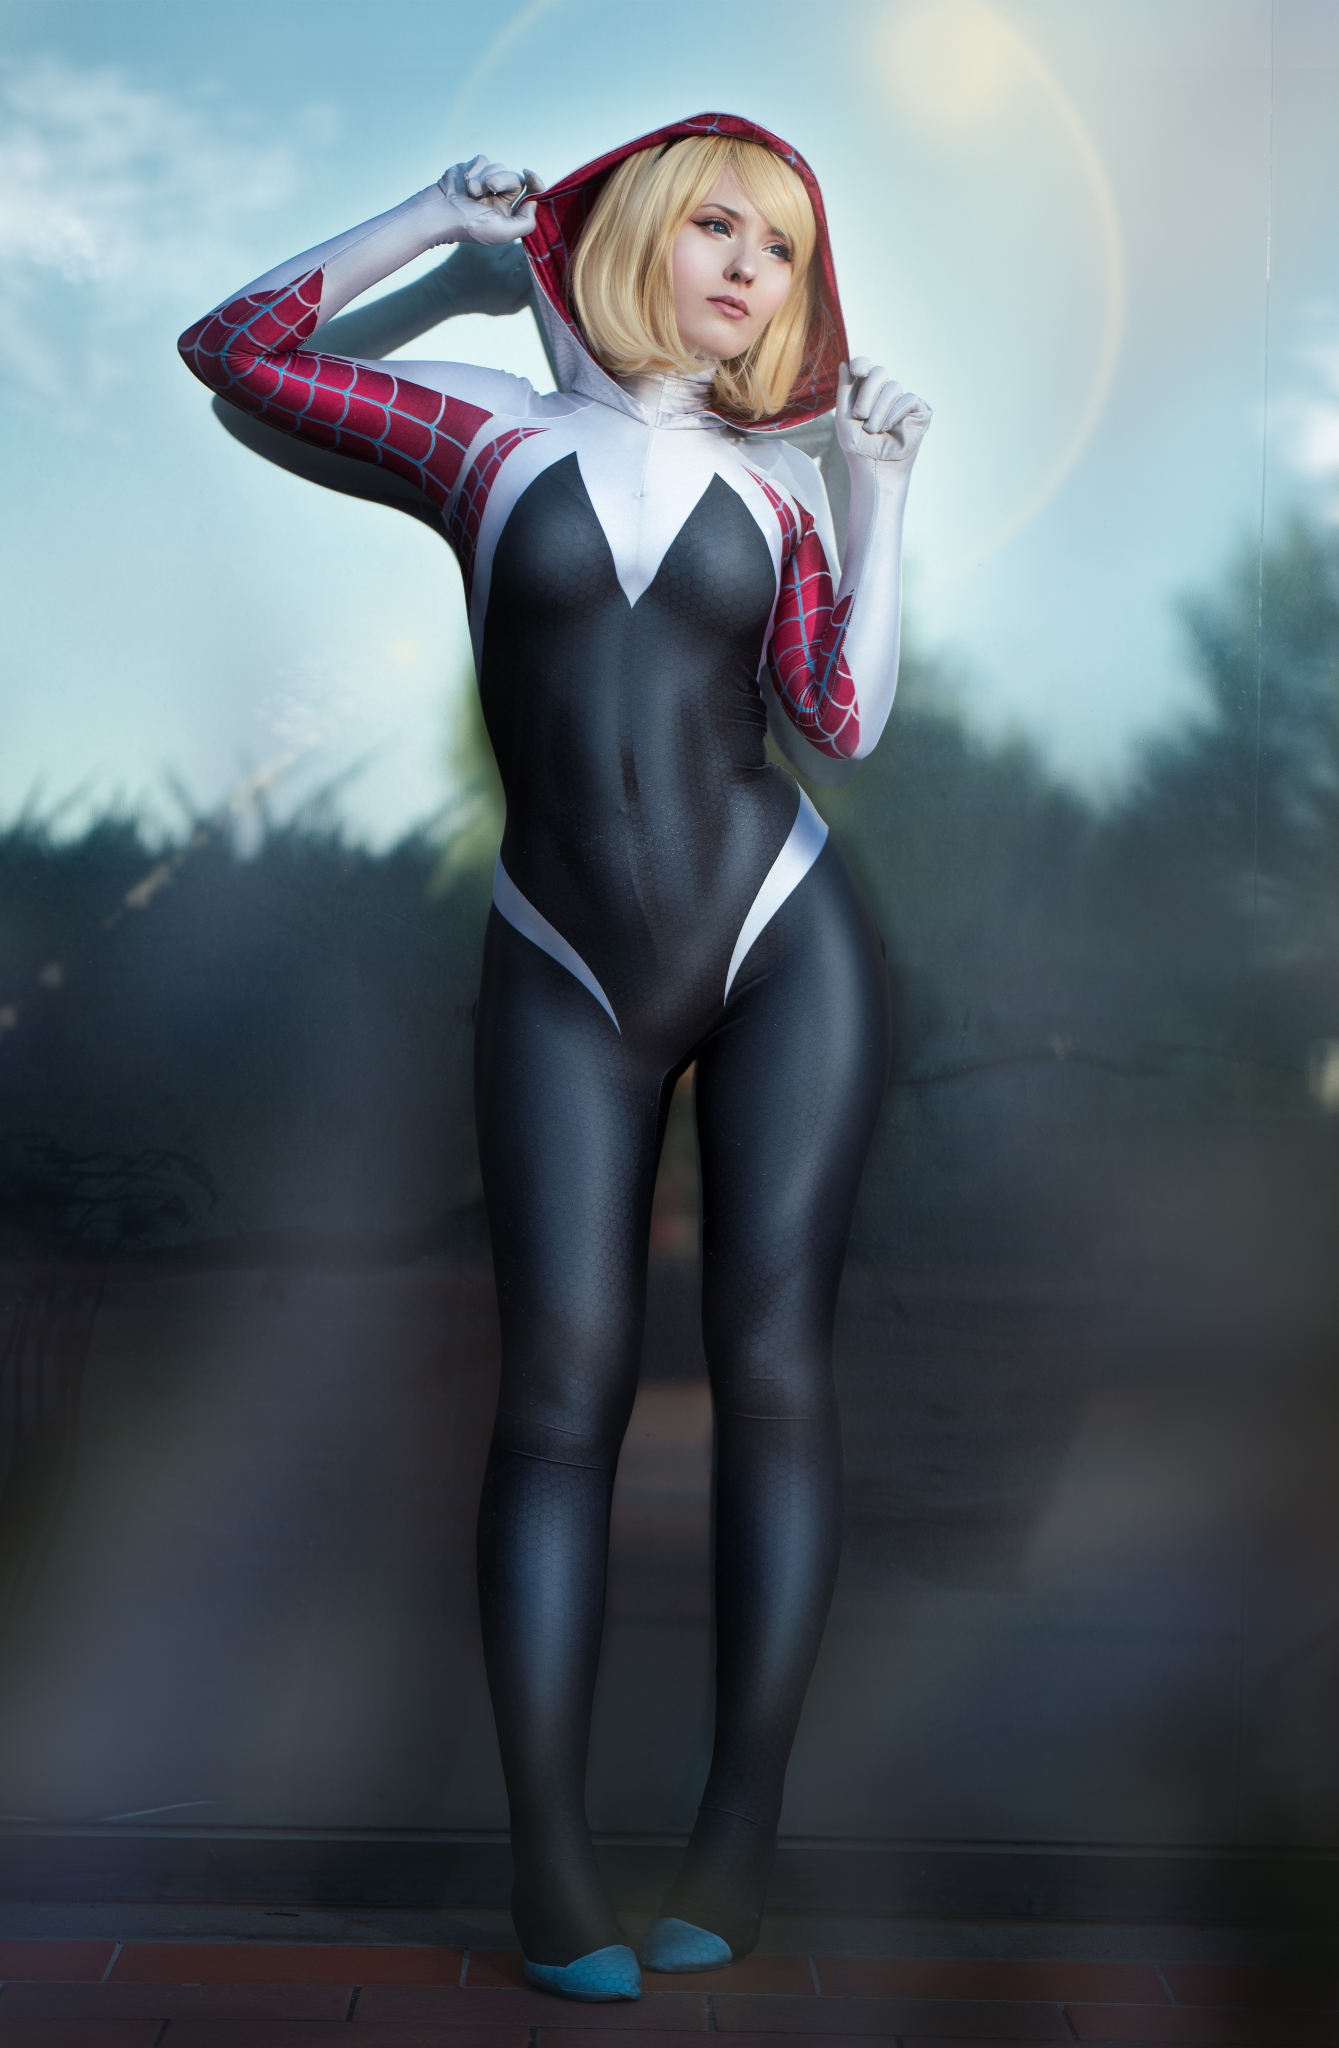 People 1339x2048 Blue Snow model blonde women cosplay Gwen Stacy Spider Gwen Spider-Man looking into the distance